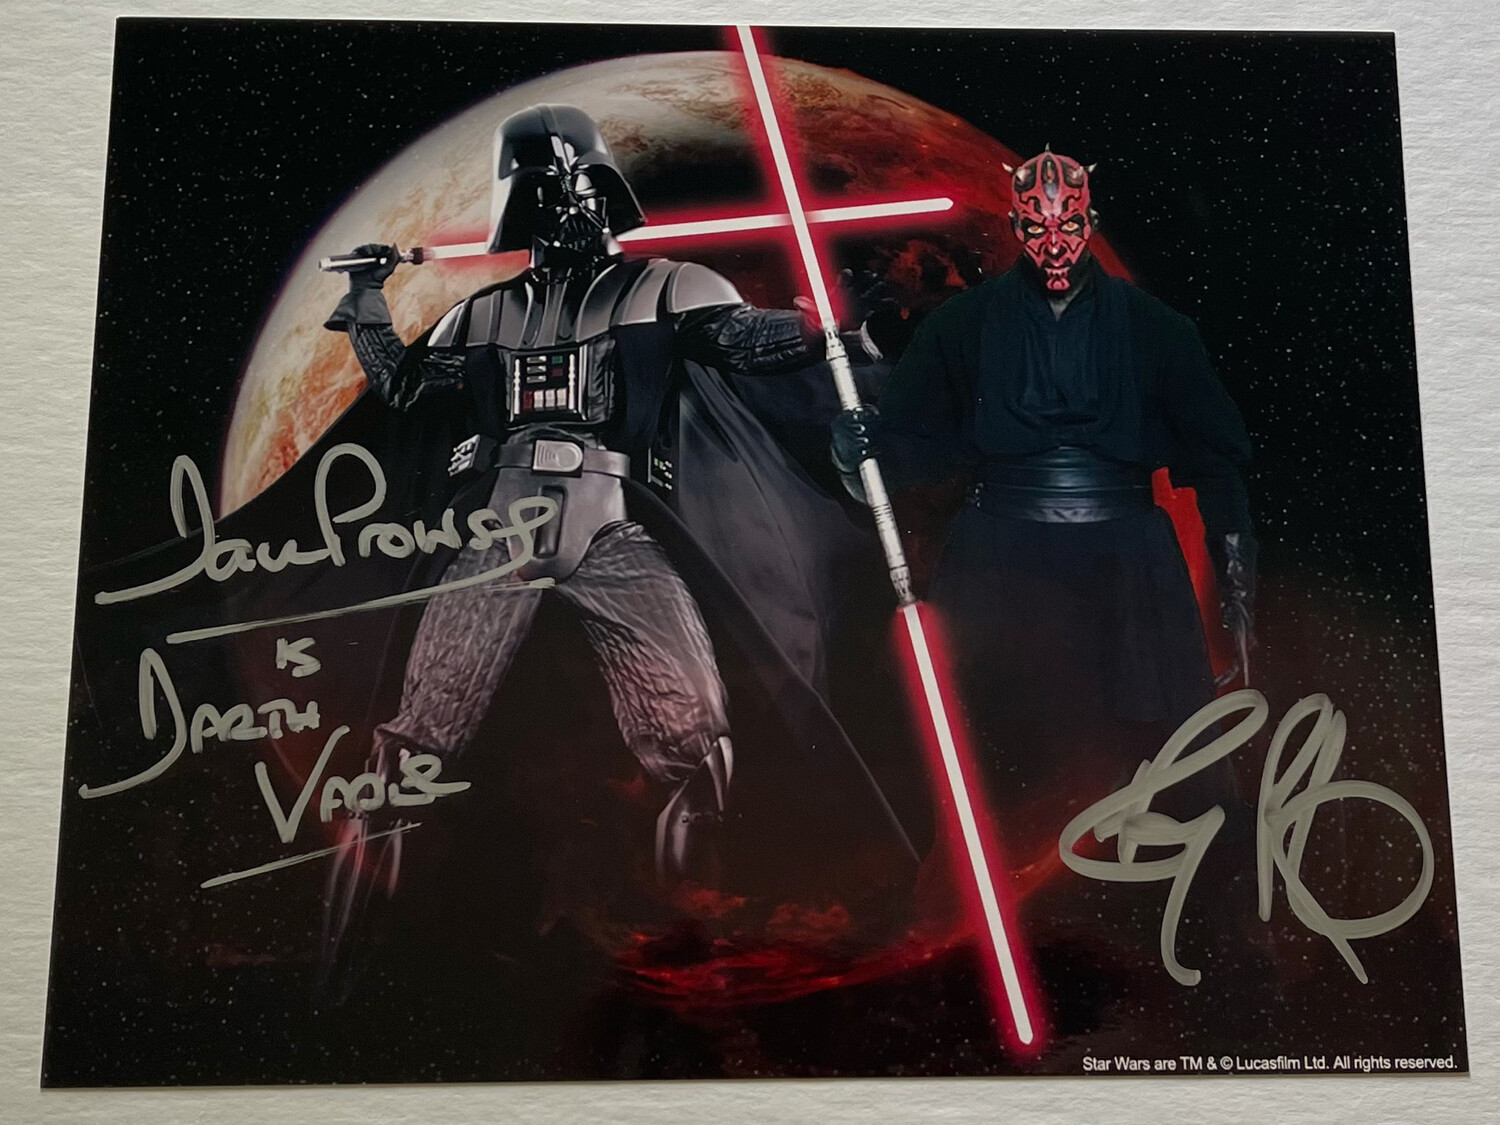 8X10 PHOTO SIGNED BY DAVE PROWSE AND RAY PARK